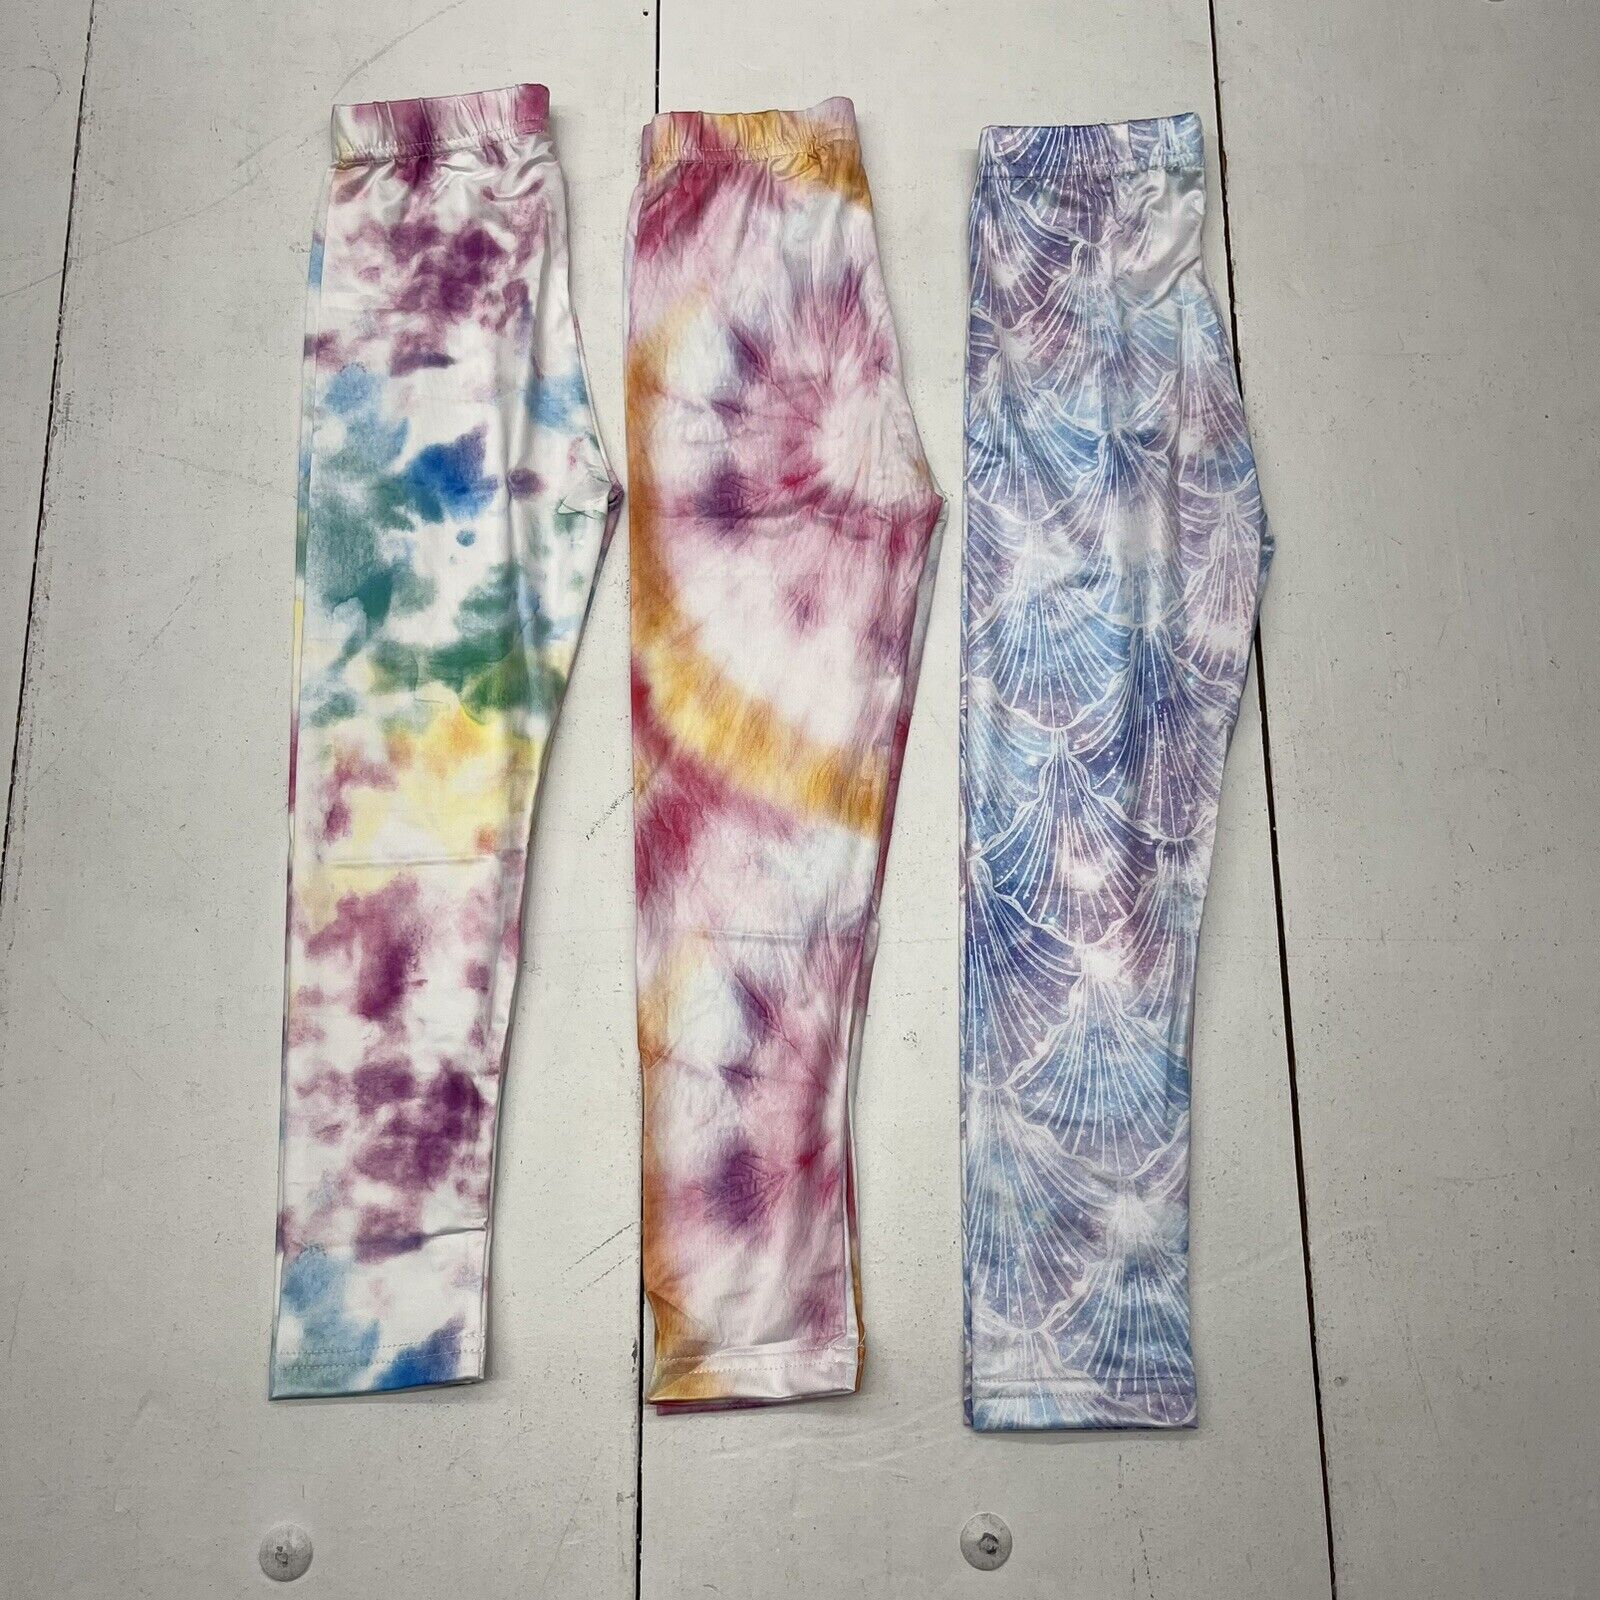 Doovid 3 Multicolored Leggings Girls Size 4-5 Years NEW